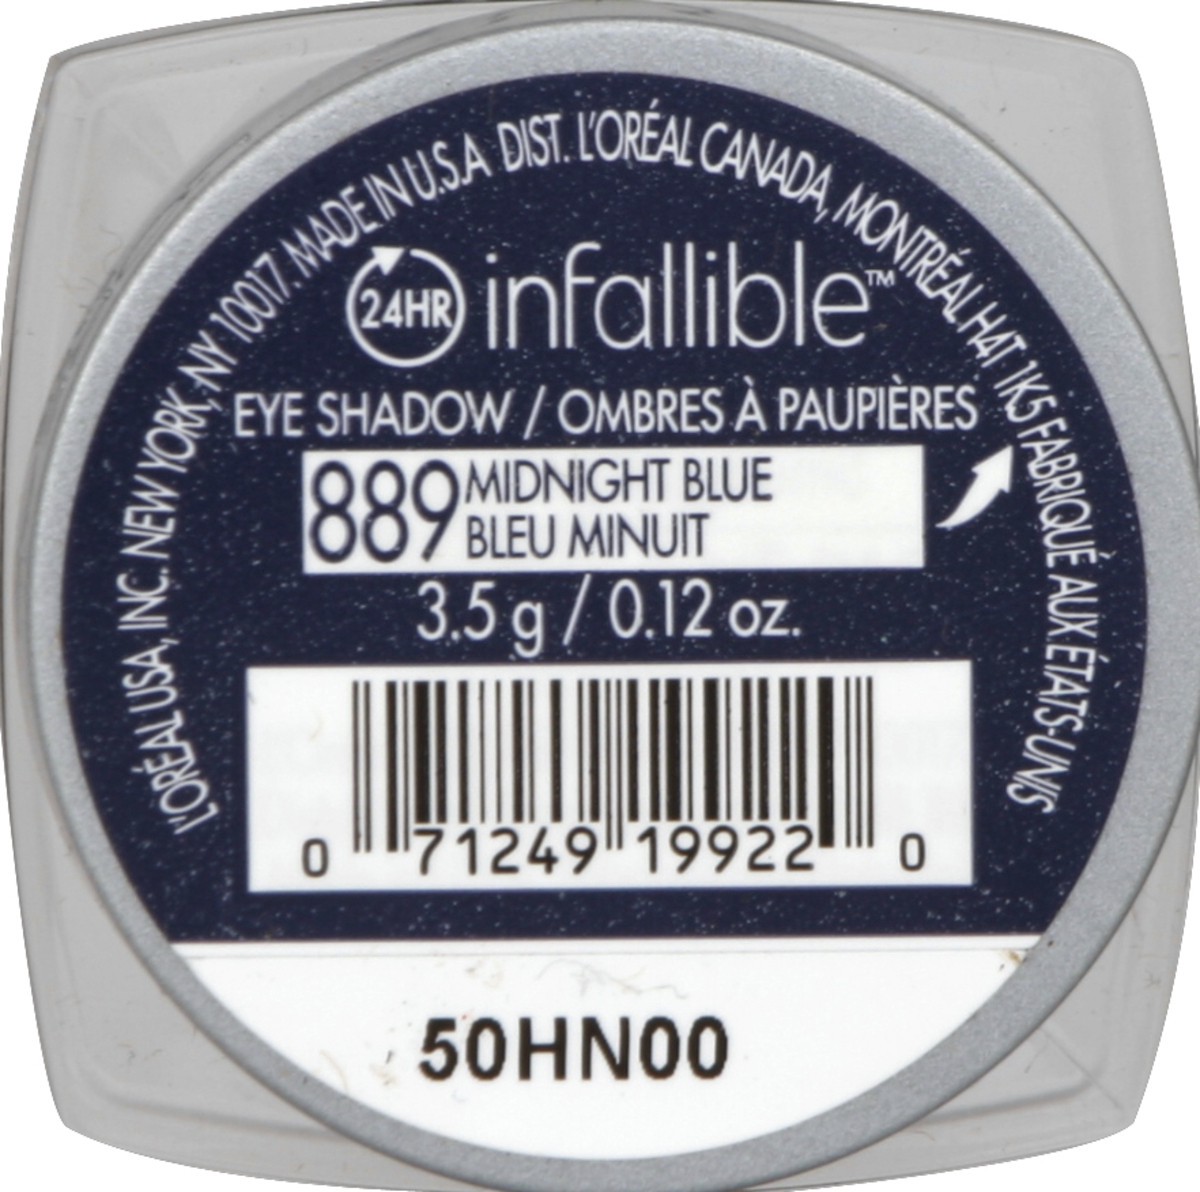 slide 4 of 4, L'Oréal Infallible Eye Shadow Midnight Blue, 1 ct